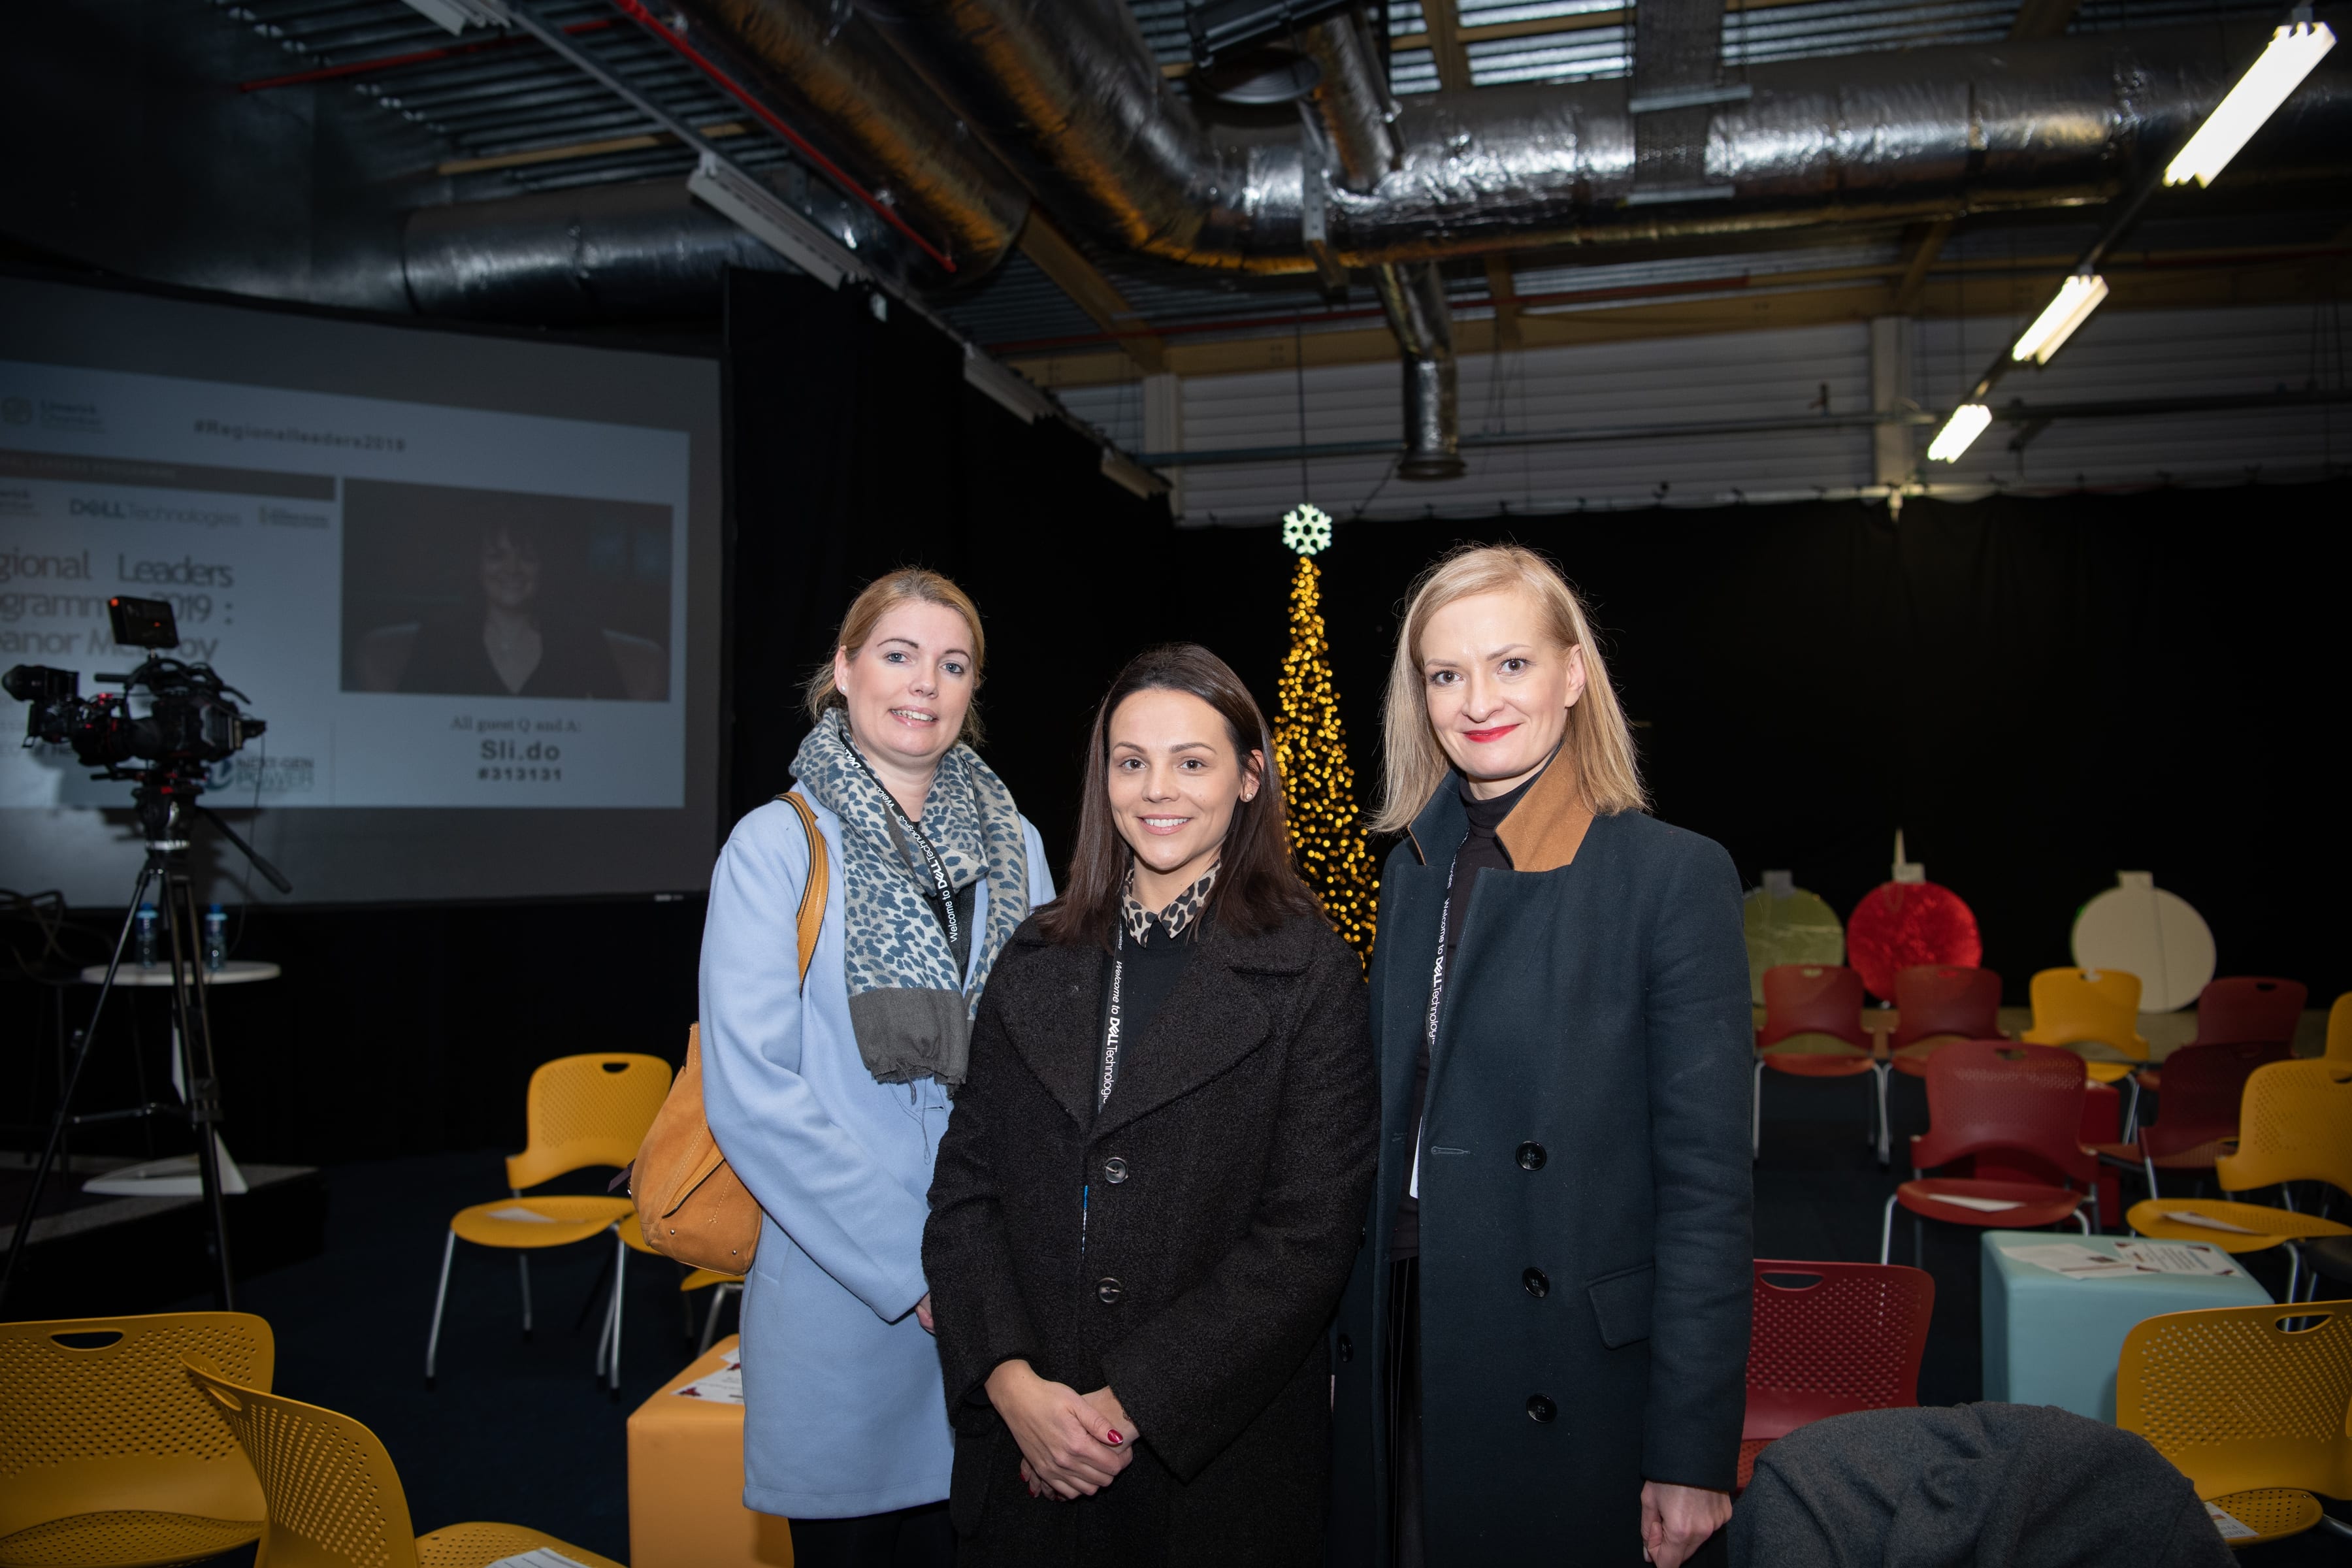 No repro fee- Regional Leaders Programme which took place on 11 December in Dell EMC, Guest speaker Eleanor McEvoy - From Left to Right: Emer McGrath - BOI, Sharon Shanahan - AIB, Paulina Wiysocka - BOI 
Photo credit Shauna Kennedy